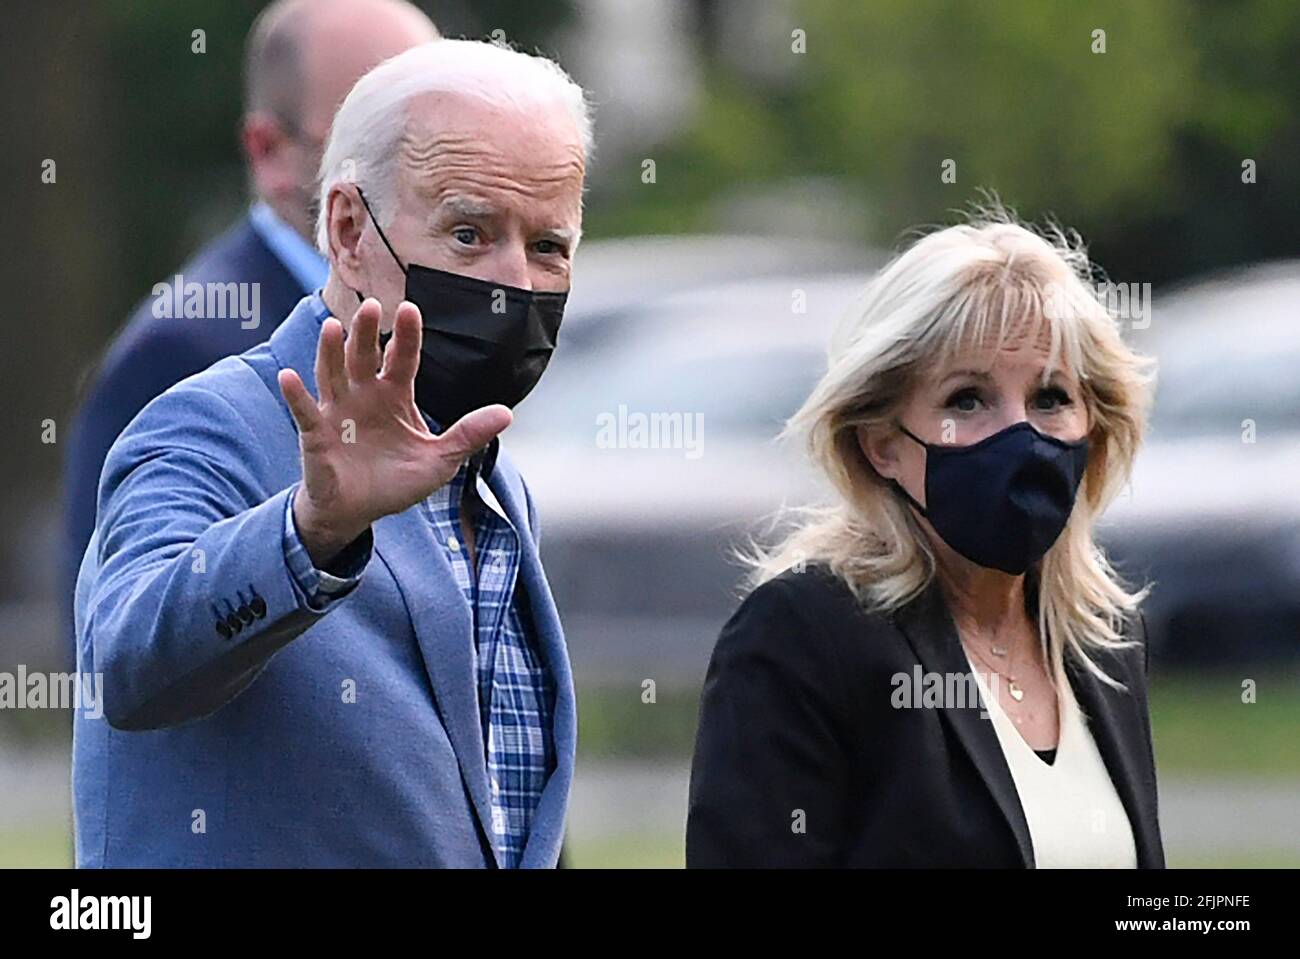 Washington, DC. 25th Apr, 2021. United States President Joe Biden waves to the press as he and first lady Dr. Jill Biden return to the White House, Sunday, April 25, 2021, in Washington, DC. The Bidens spent the weekend at their home in Wilmington, Delaware. Credit: Mike Theiler/Pool via CNP | usage worldwide Credit: dpa/Alamy Live News Stock Photo